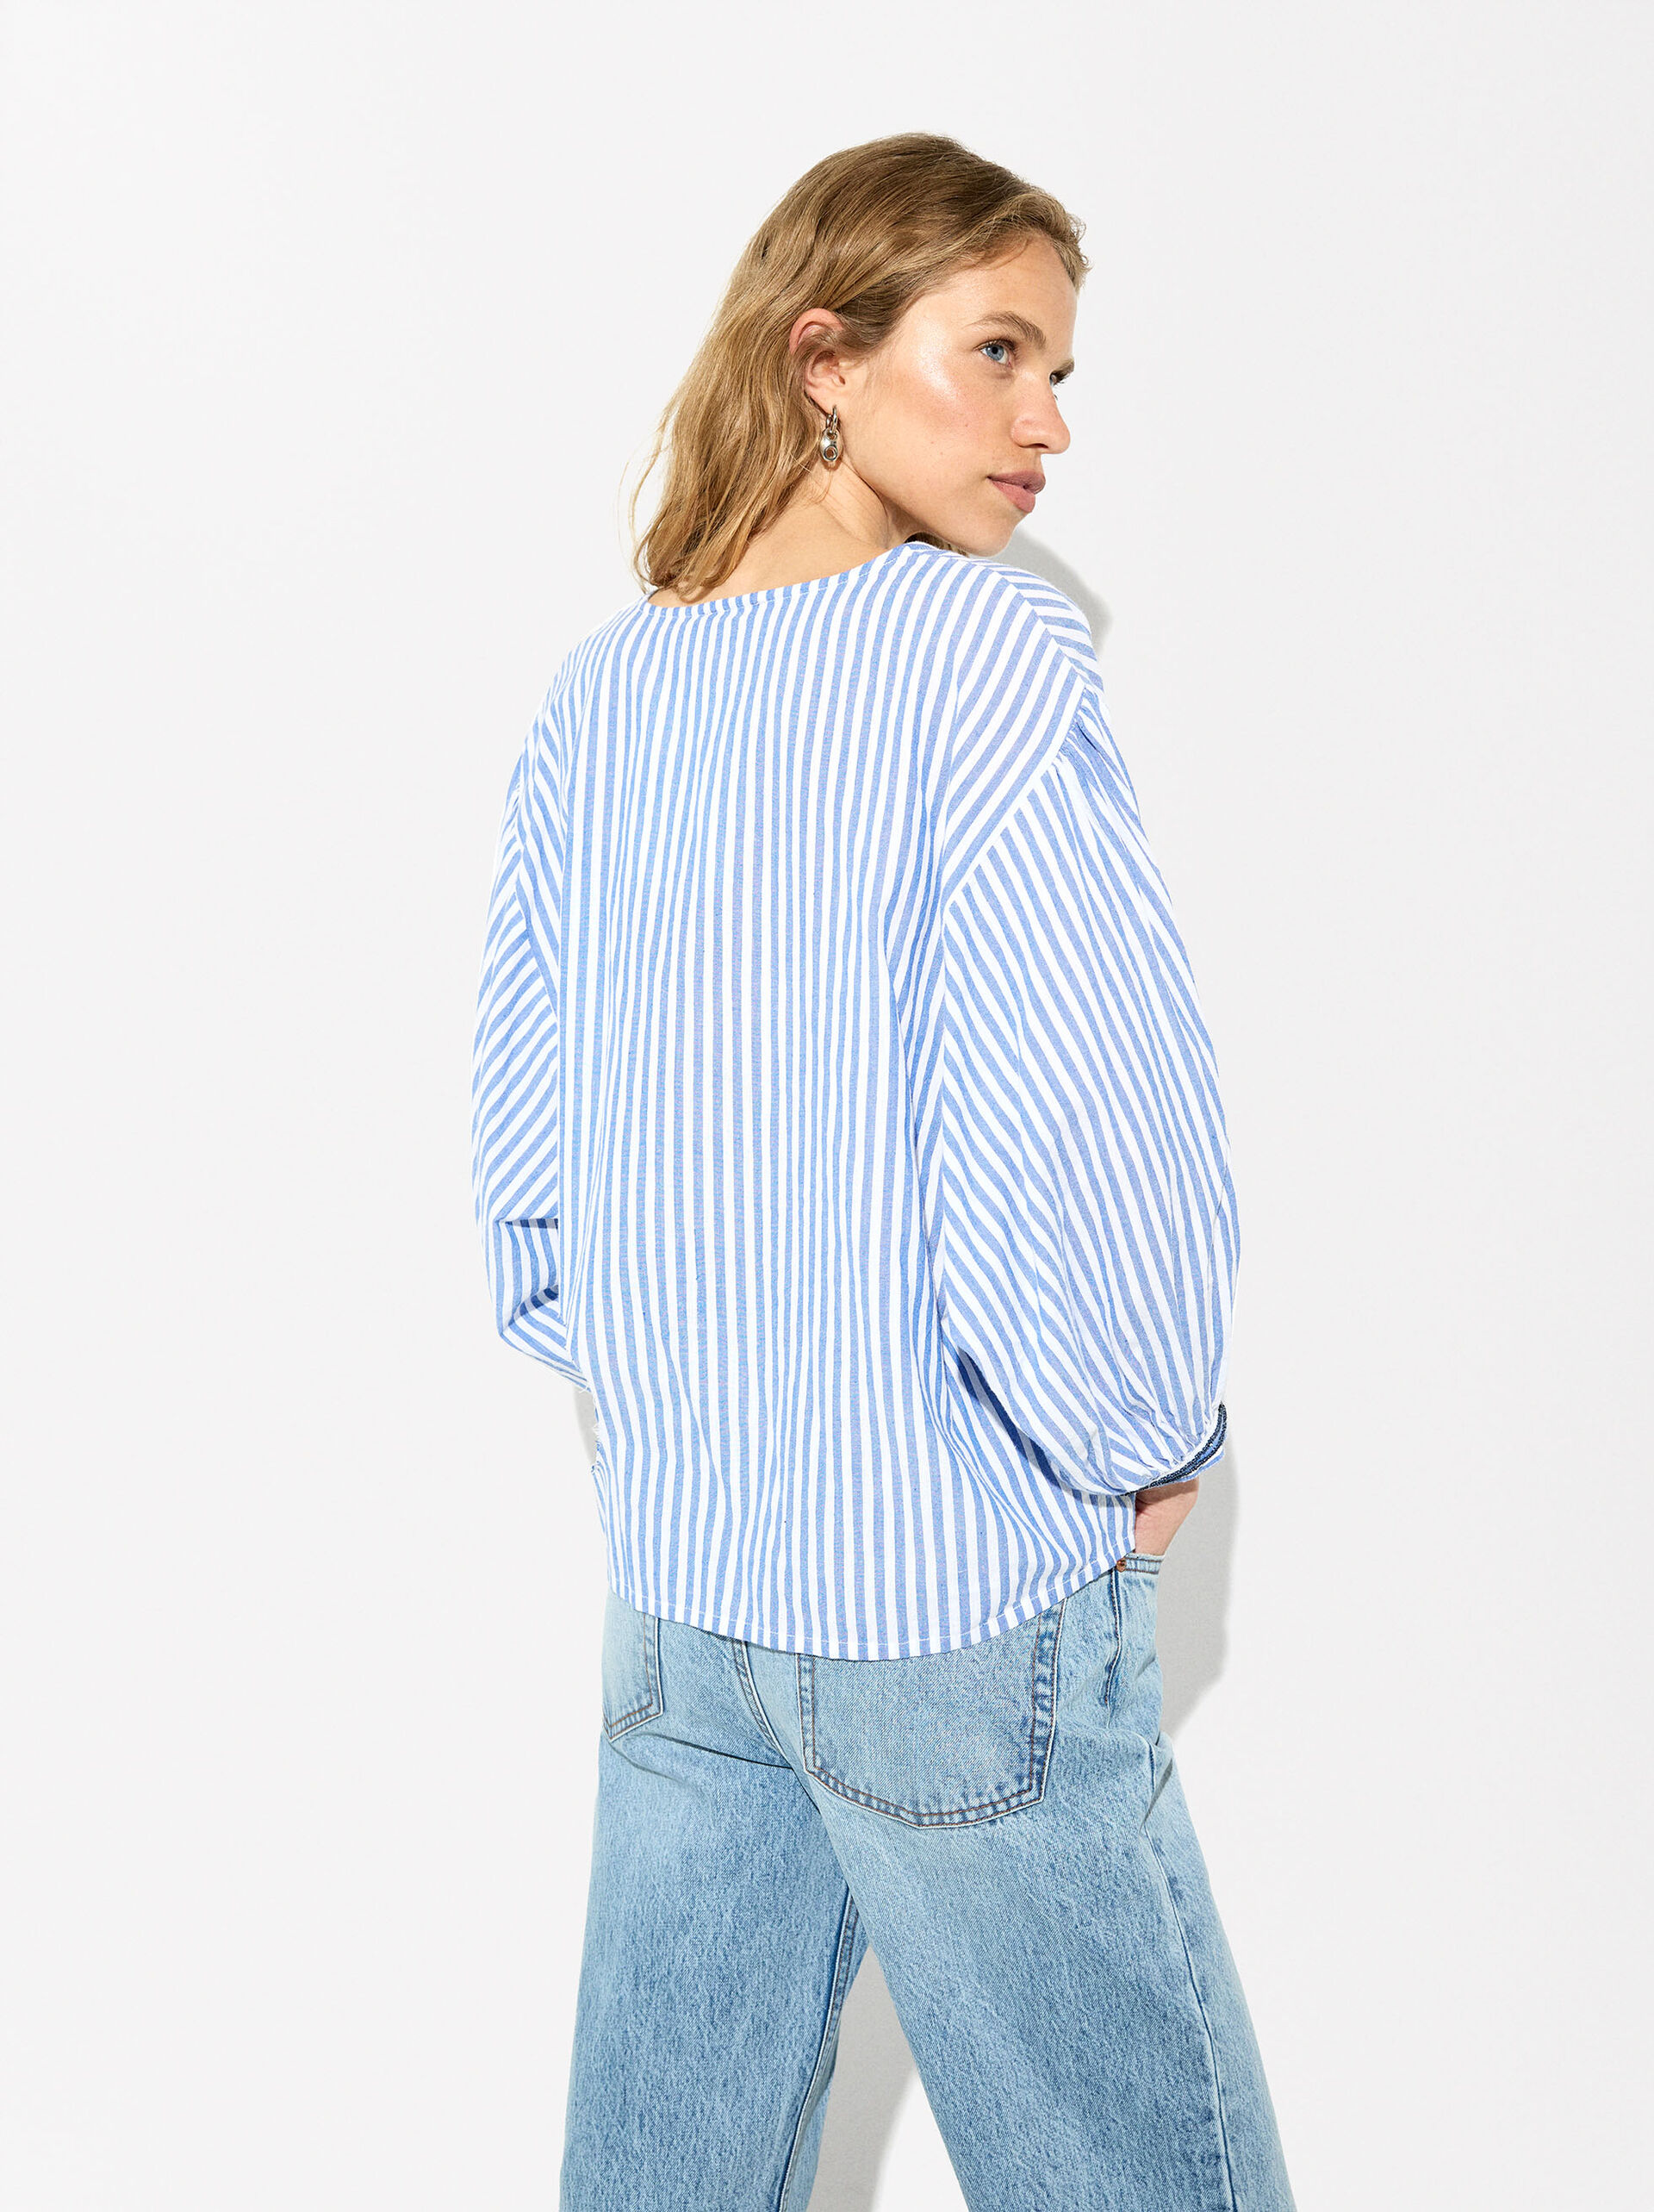 100% Cotton Striped Shirt image number 5.0